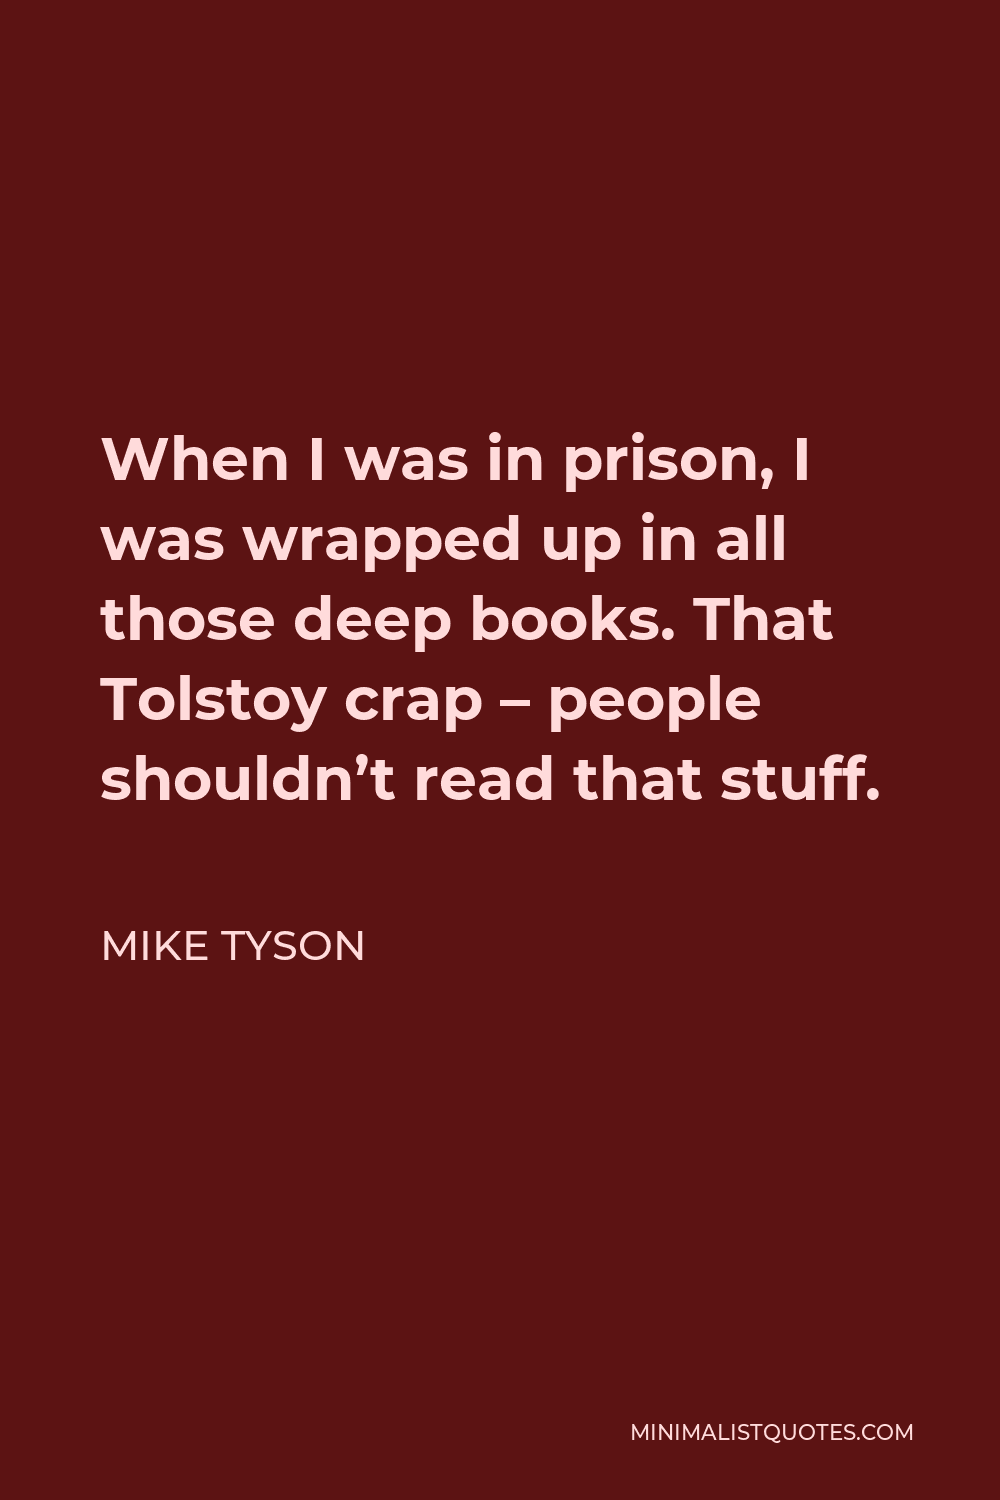 Mike Tyson Quote - When I was in prison, I was wrapped up in all those deep books. That Tolstoy crap – people shouldn’t read that stuff.